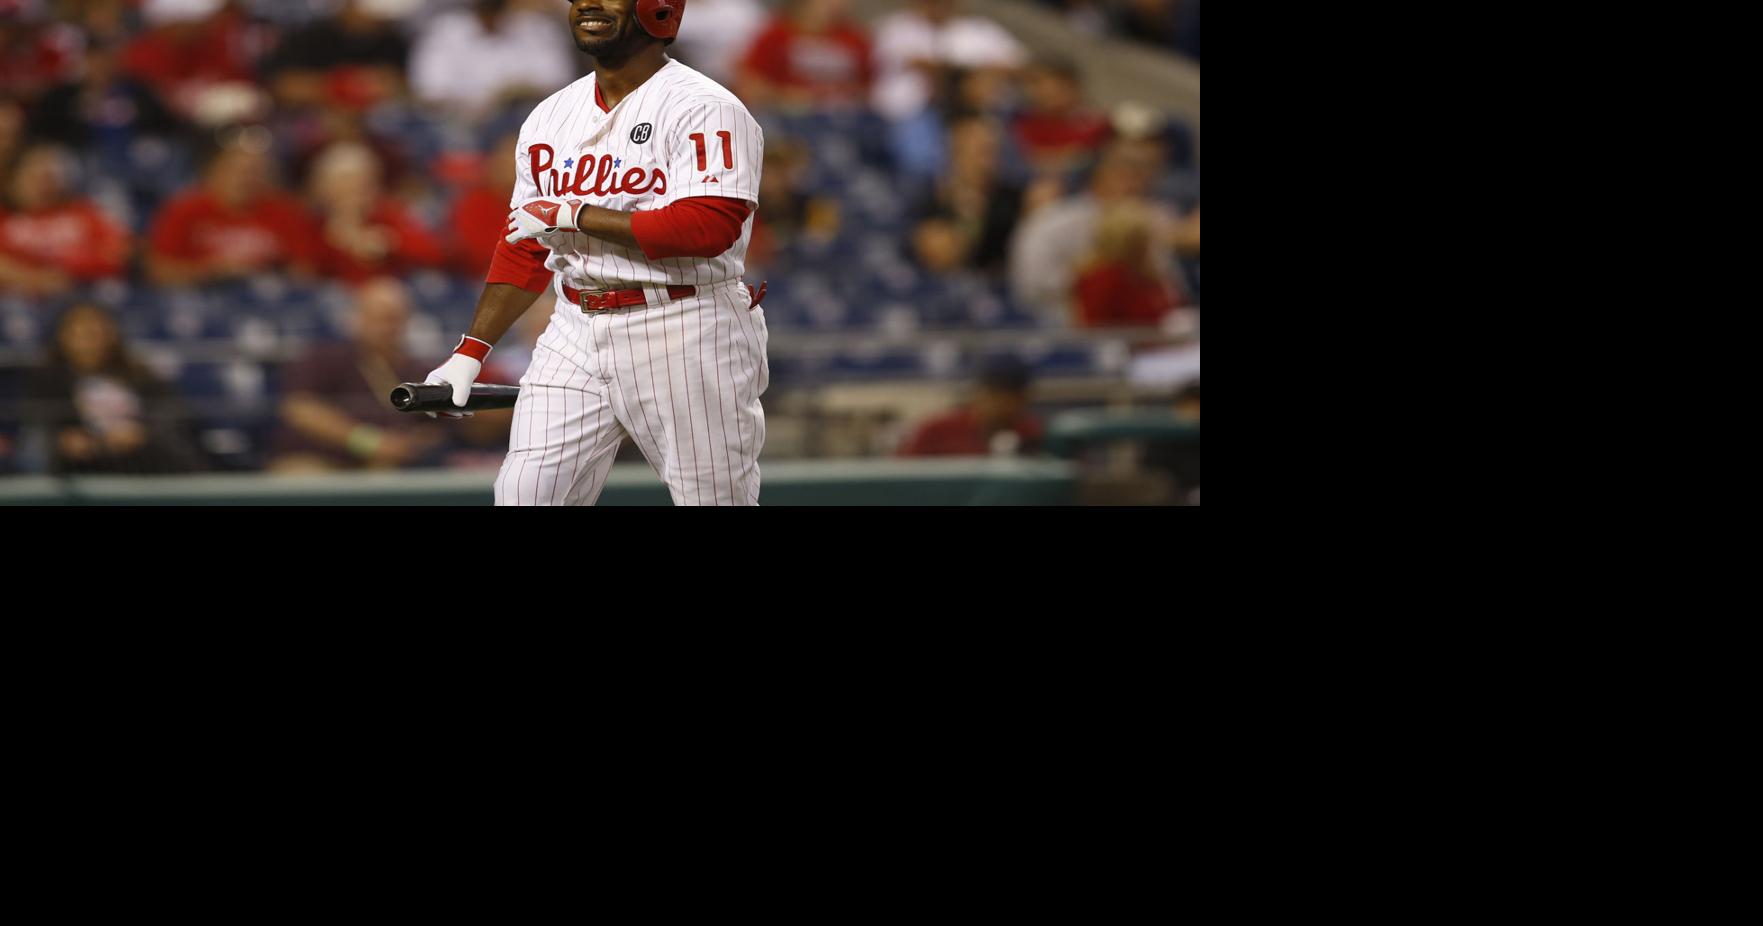 Jimmy Rollins wins his fourth Gold Glove